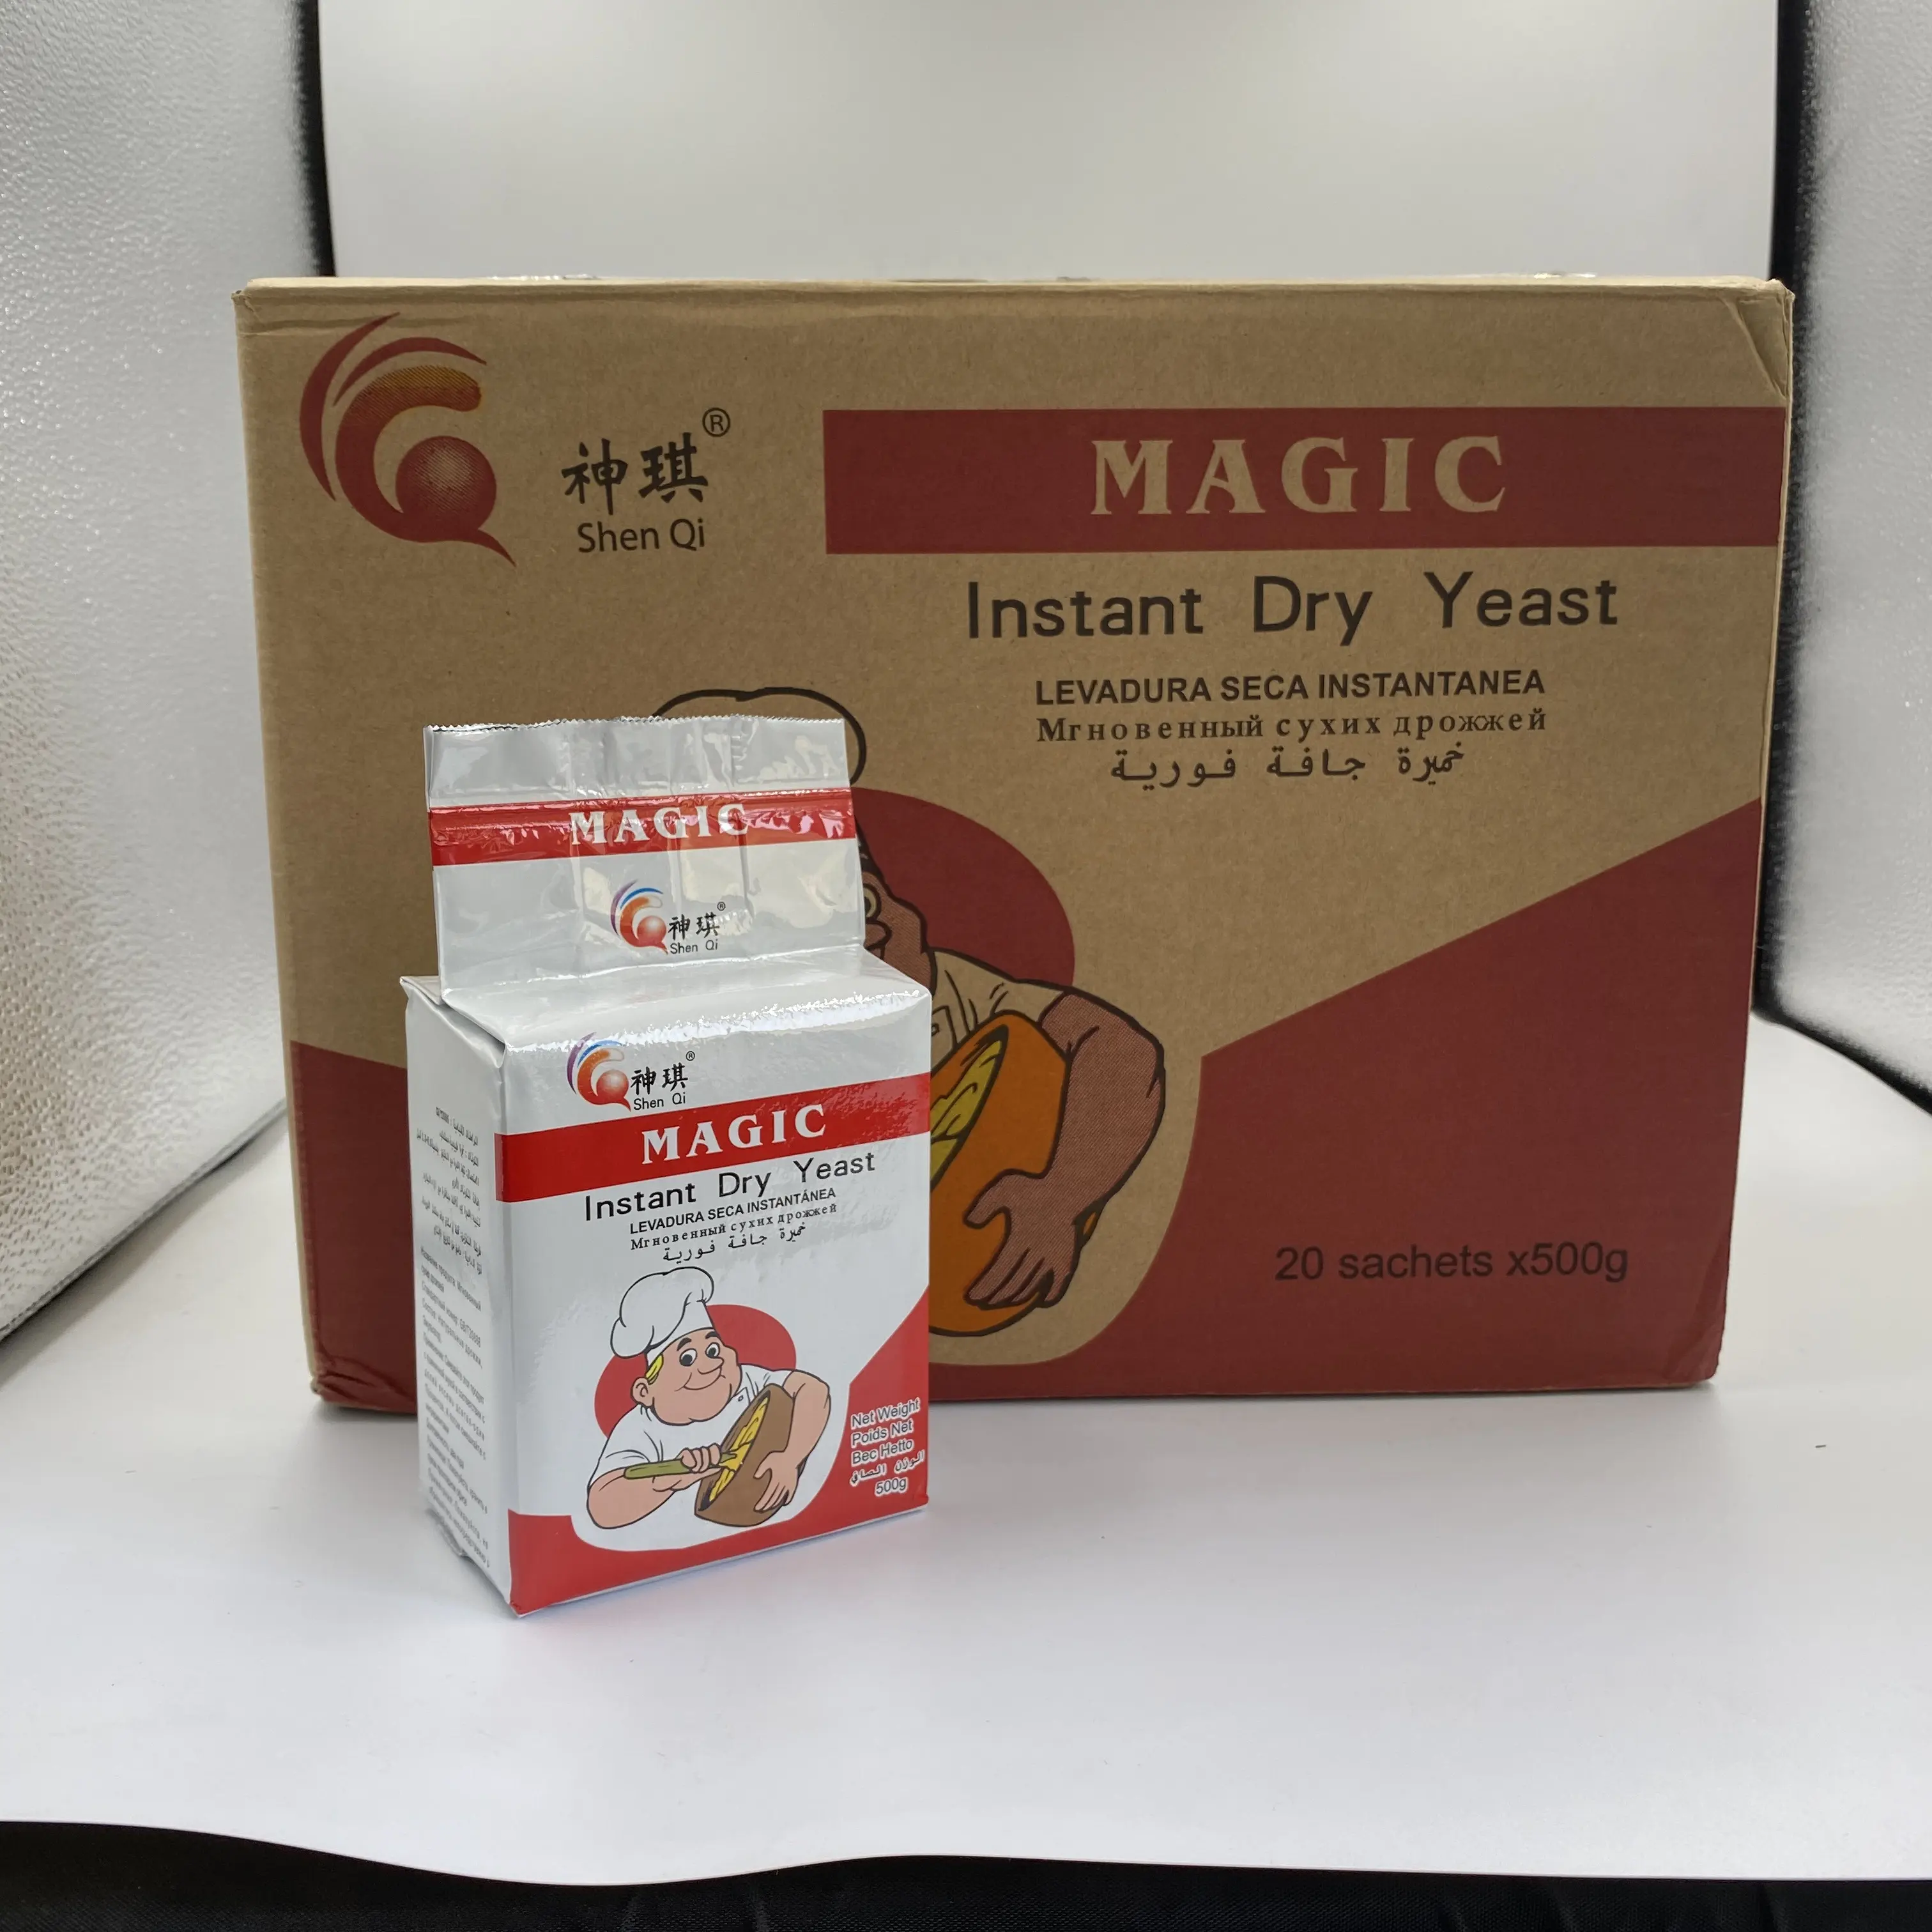 MAGIC Low Sugar Instant Dry Yeast 500g for bread